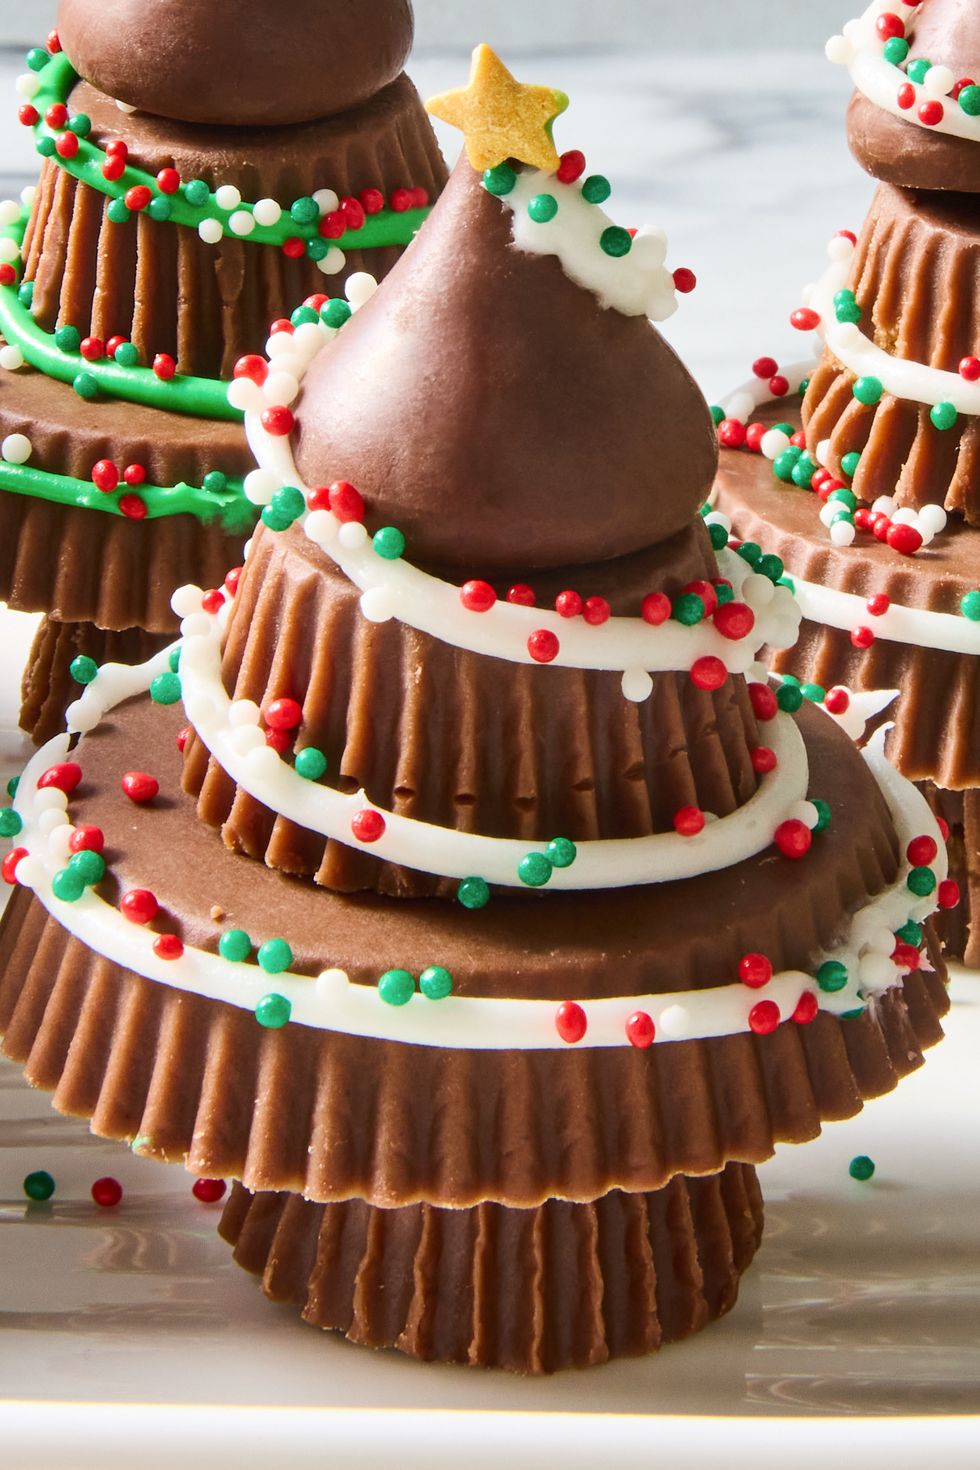 stacks of mini reeses peanut butter cups decorated with white and green royal icing and red green and white nonpareil and star sprinkles to look like christmas trees